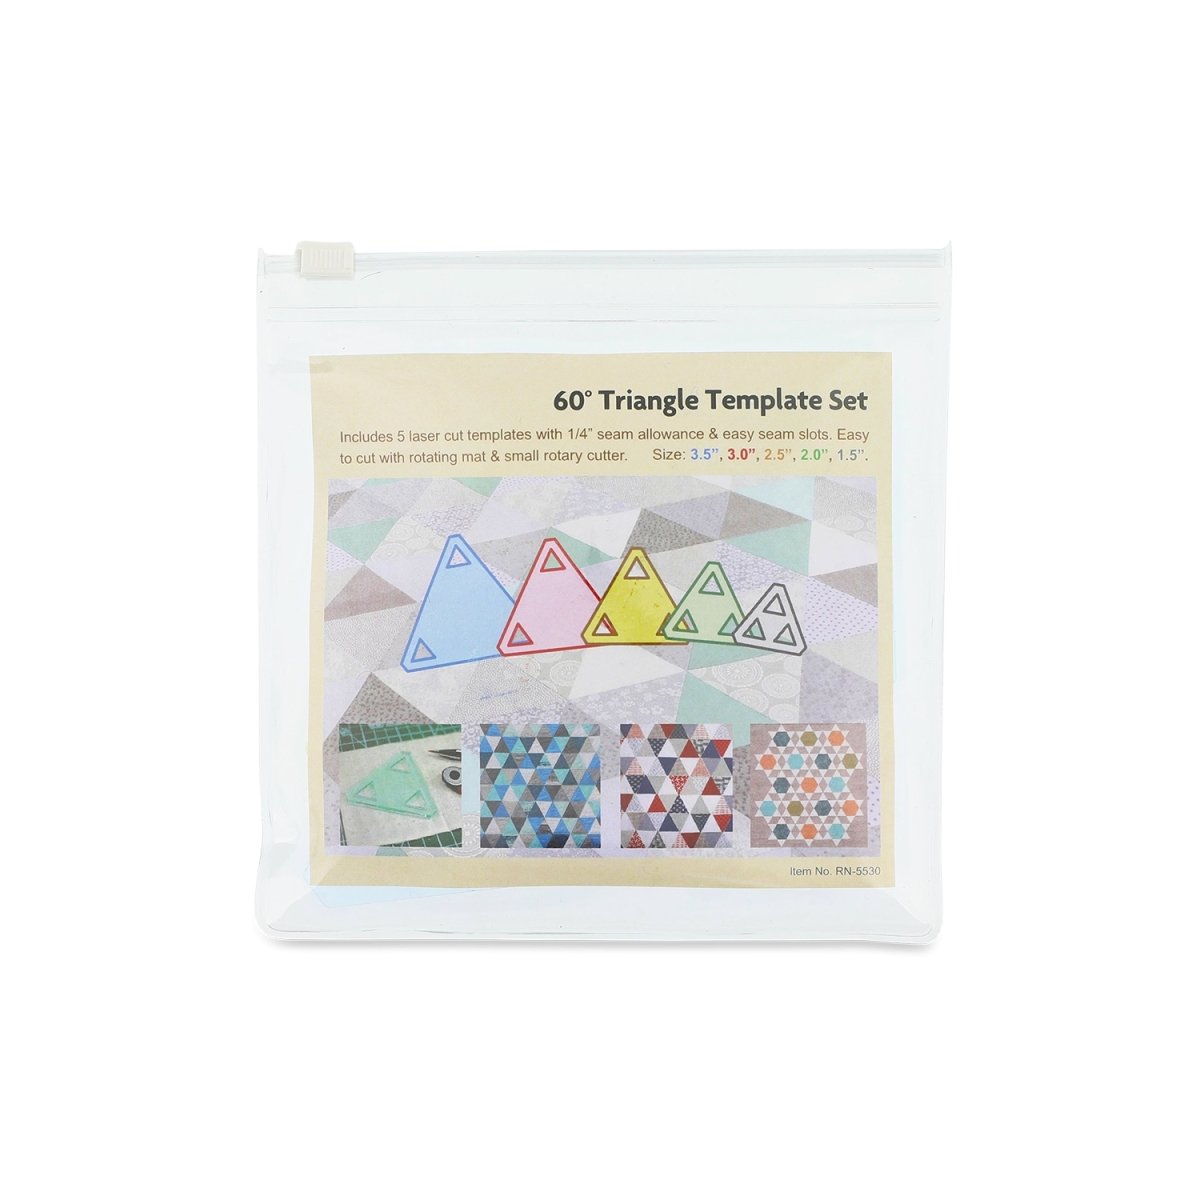 5pc 60 Degree Triangle Template set for quilting